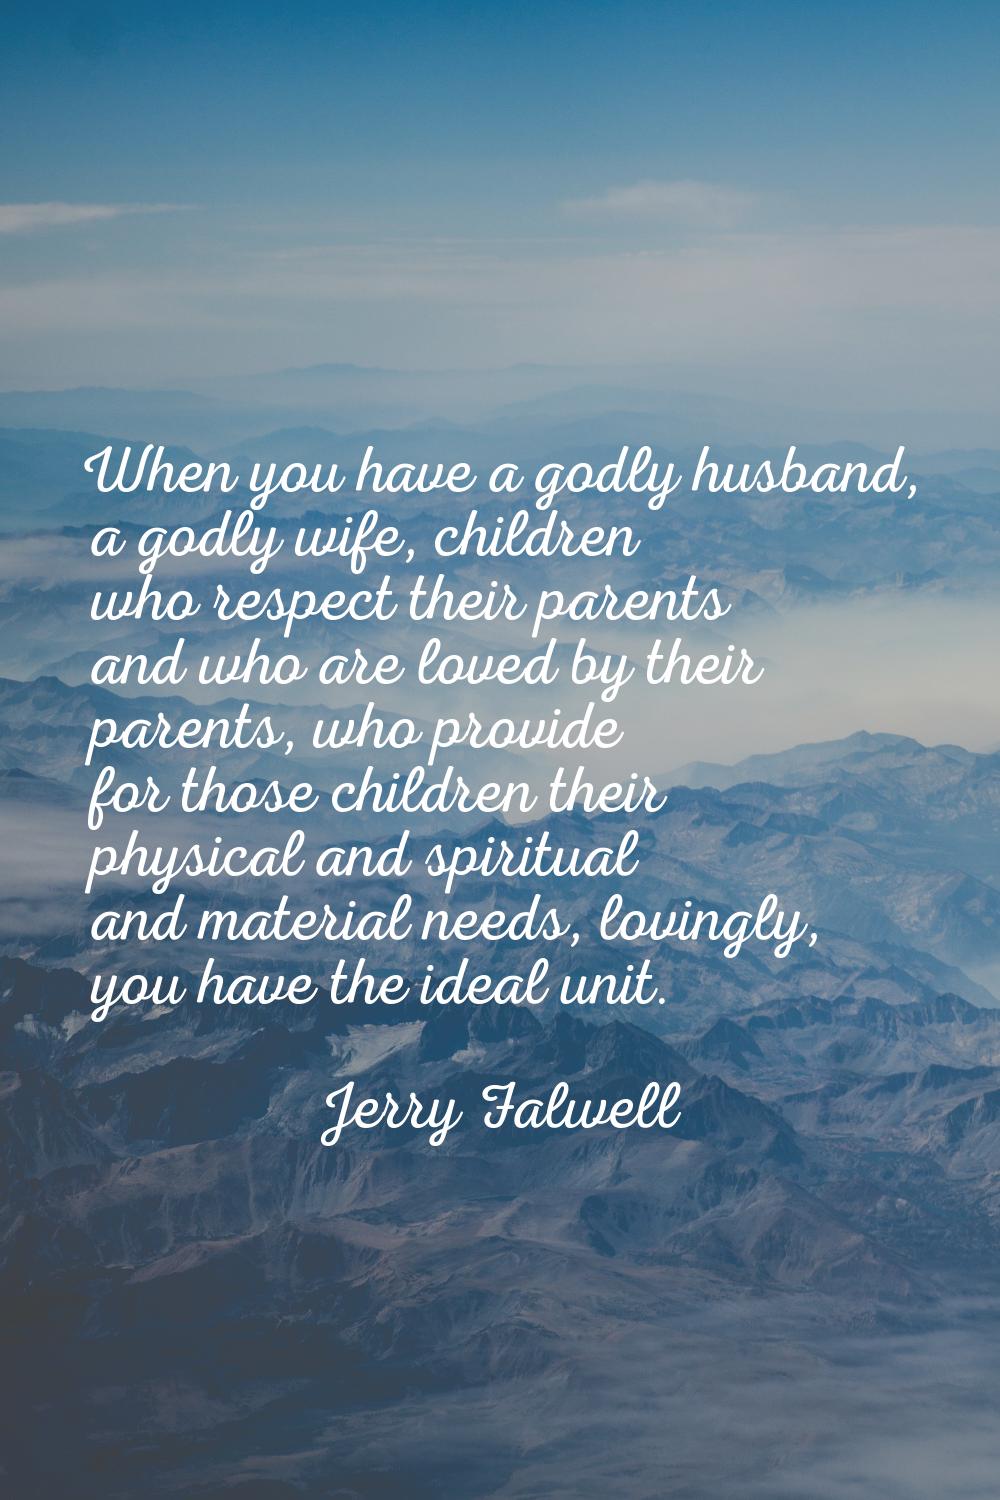 When you have a godly husband, a godly wife, children who respect their parents and who are loved b